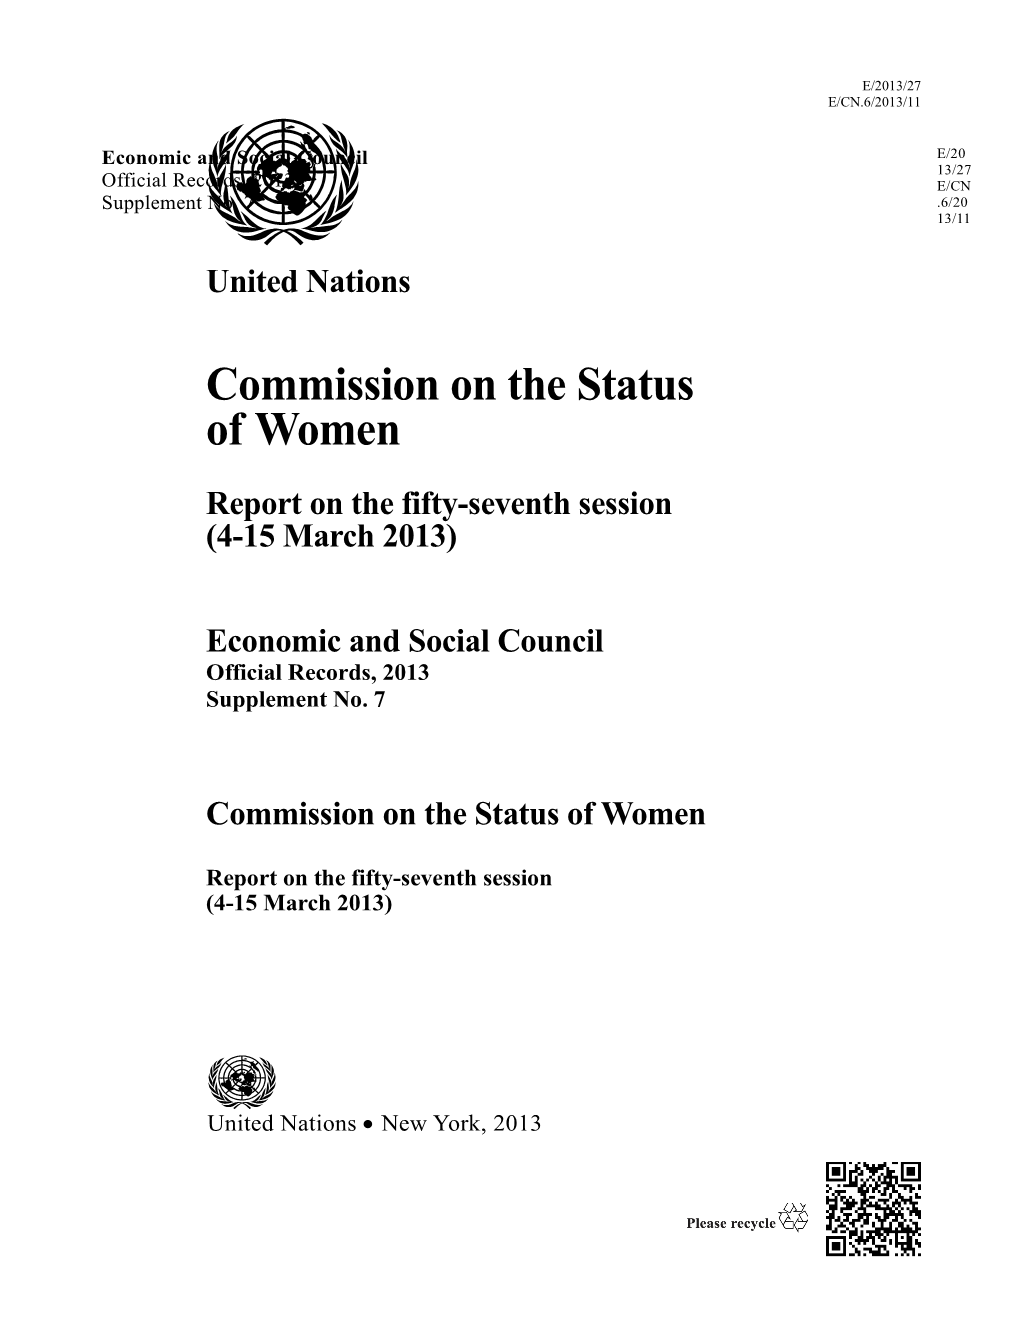 Commission on the Status Ofwomen